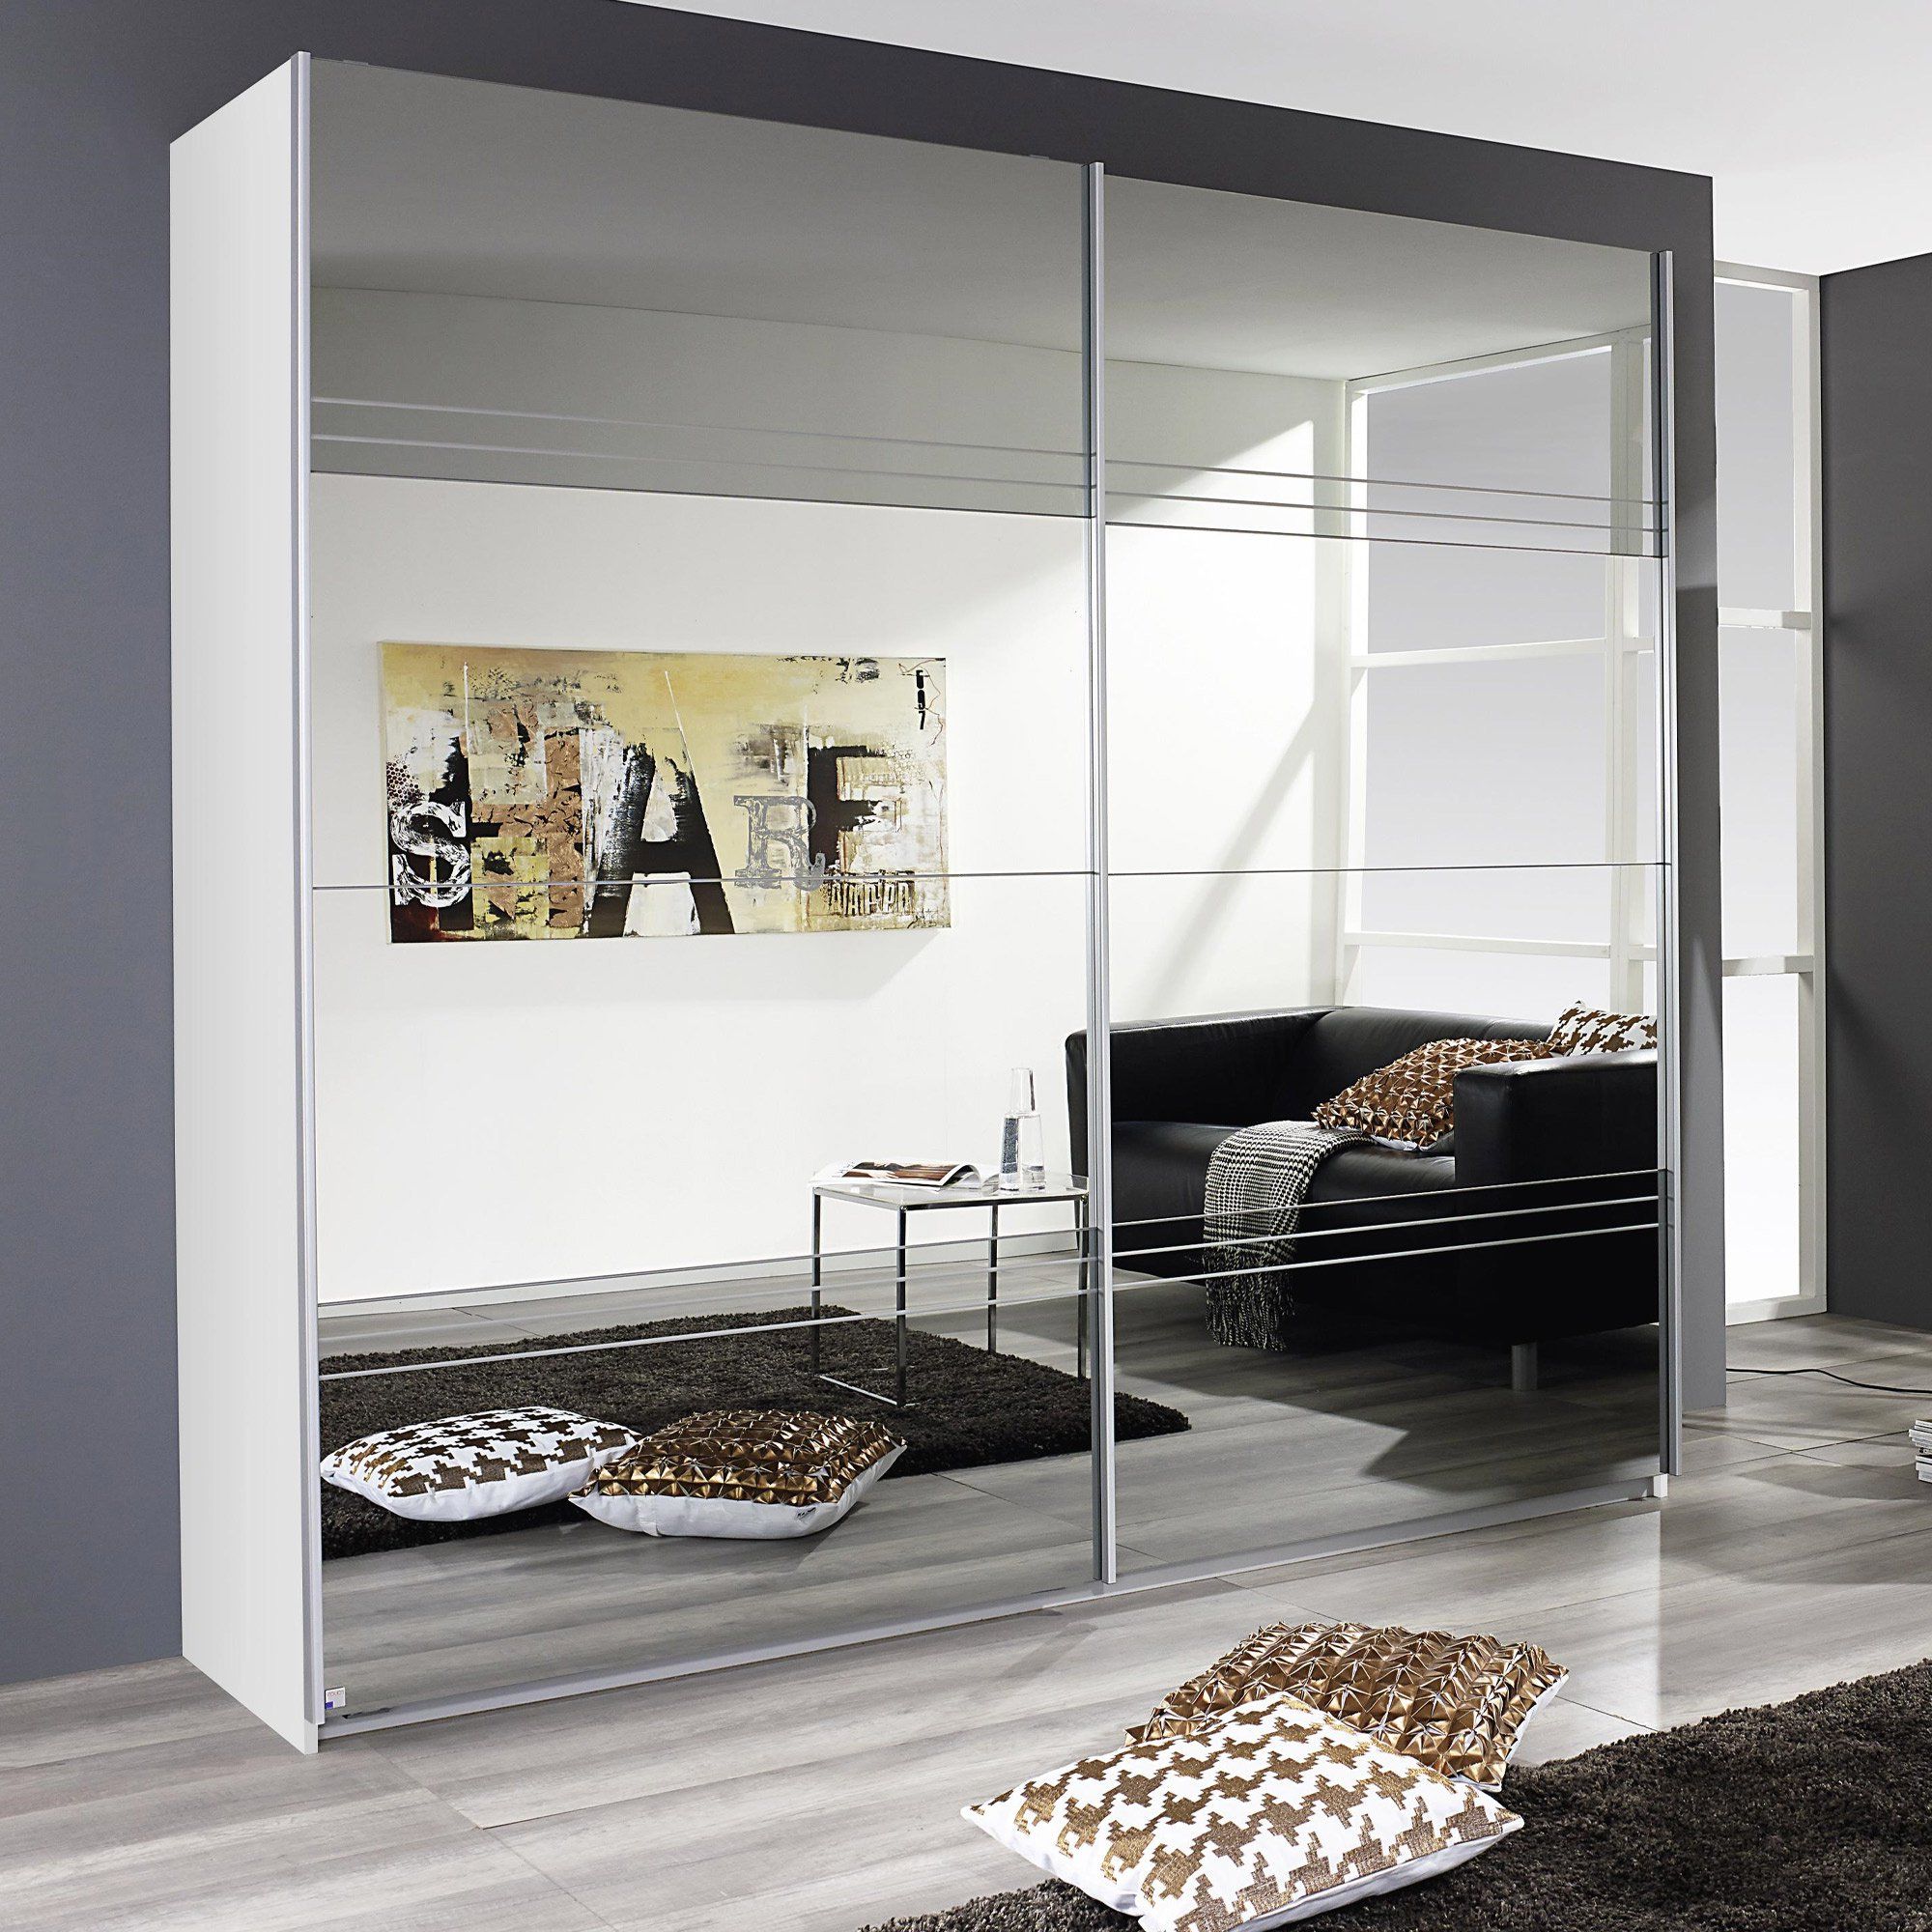 White Cleo Mirrored Door Gliding Door Wardrobe Throughout Cheap Wardrobes With Mirrors (View 2 of 20)